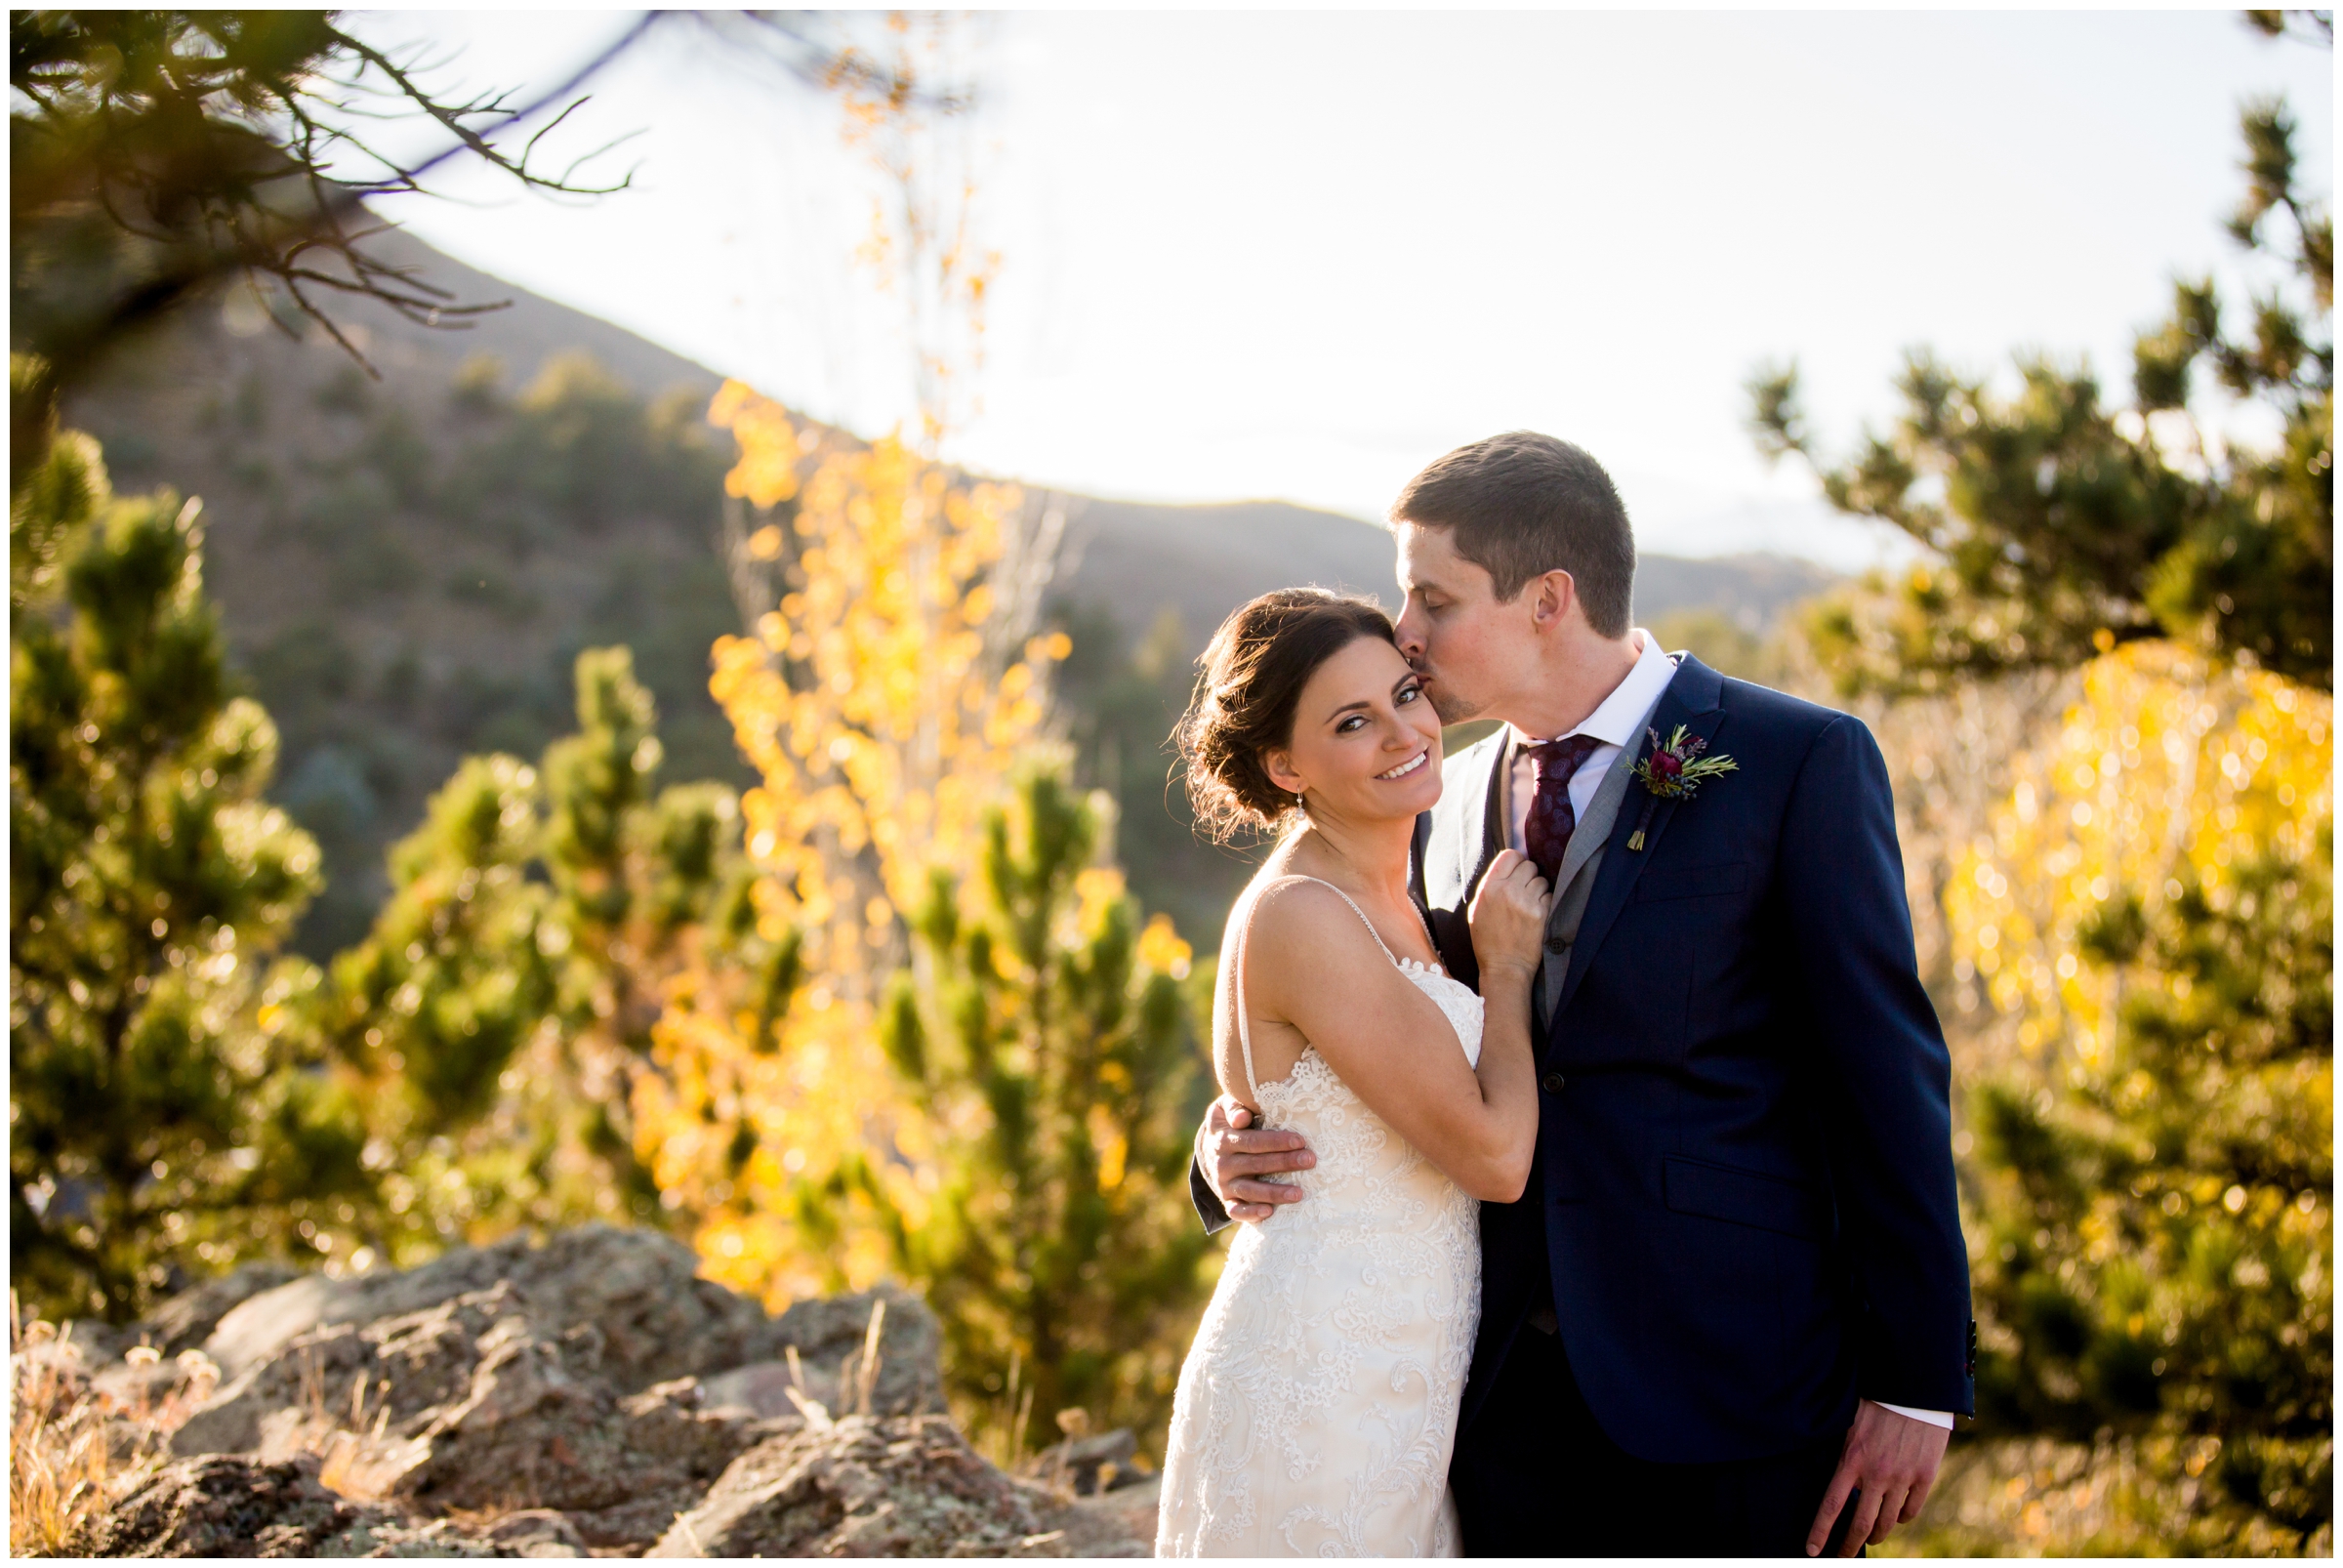 Lionscrest manor wedding pictures by Colorado photographer Plum Pretty Photography. Fall wedding in Colorado mountains with red and blue details.